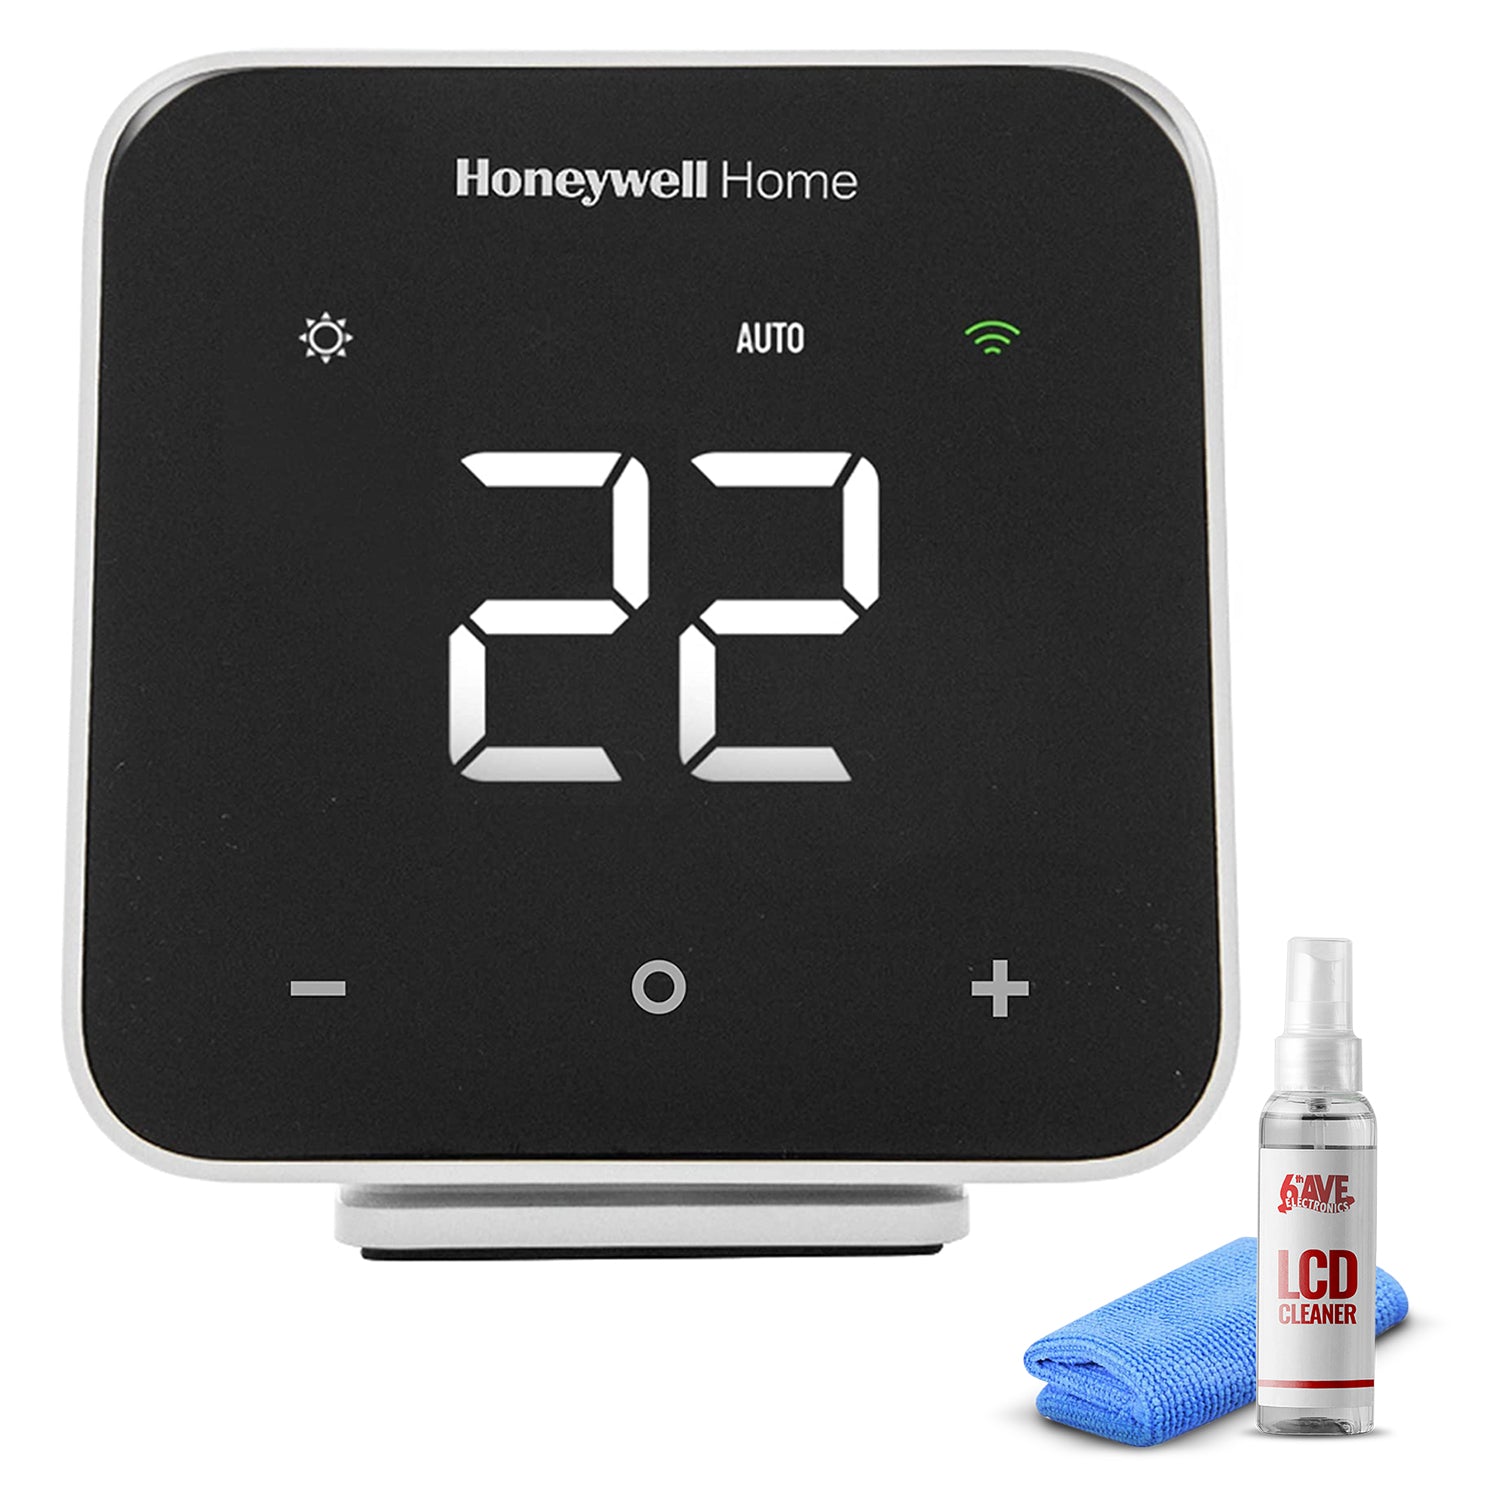 Honeywell D6 Pro Wi-Fi Ductless Controller Black + LCD Cleaner